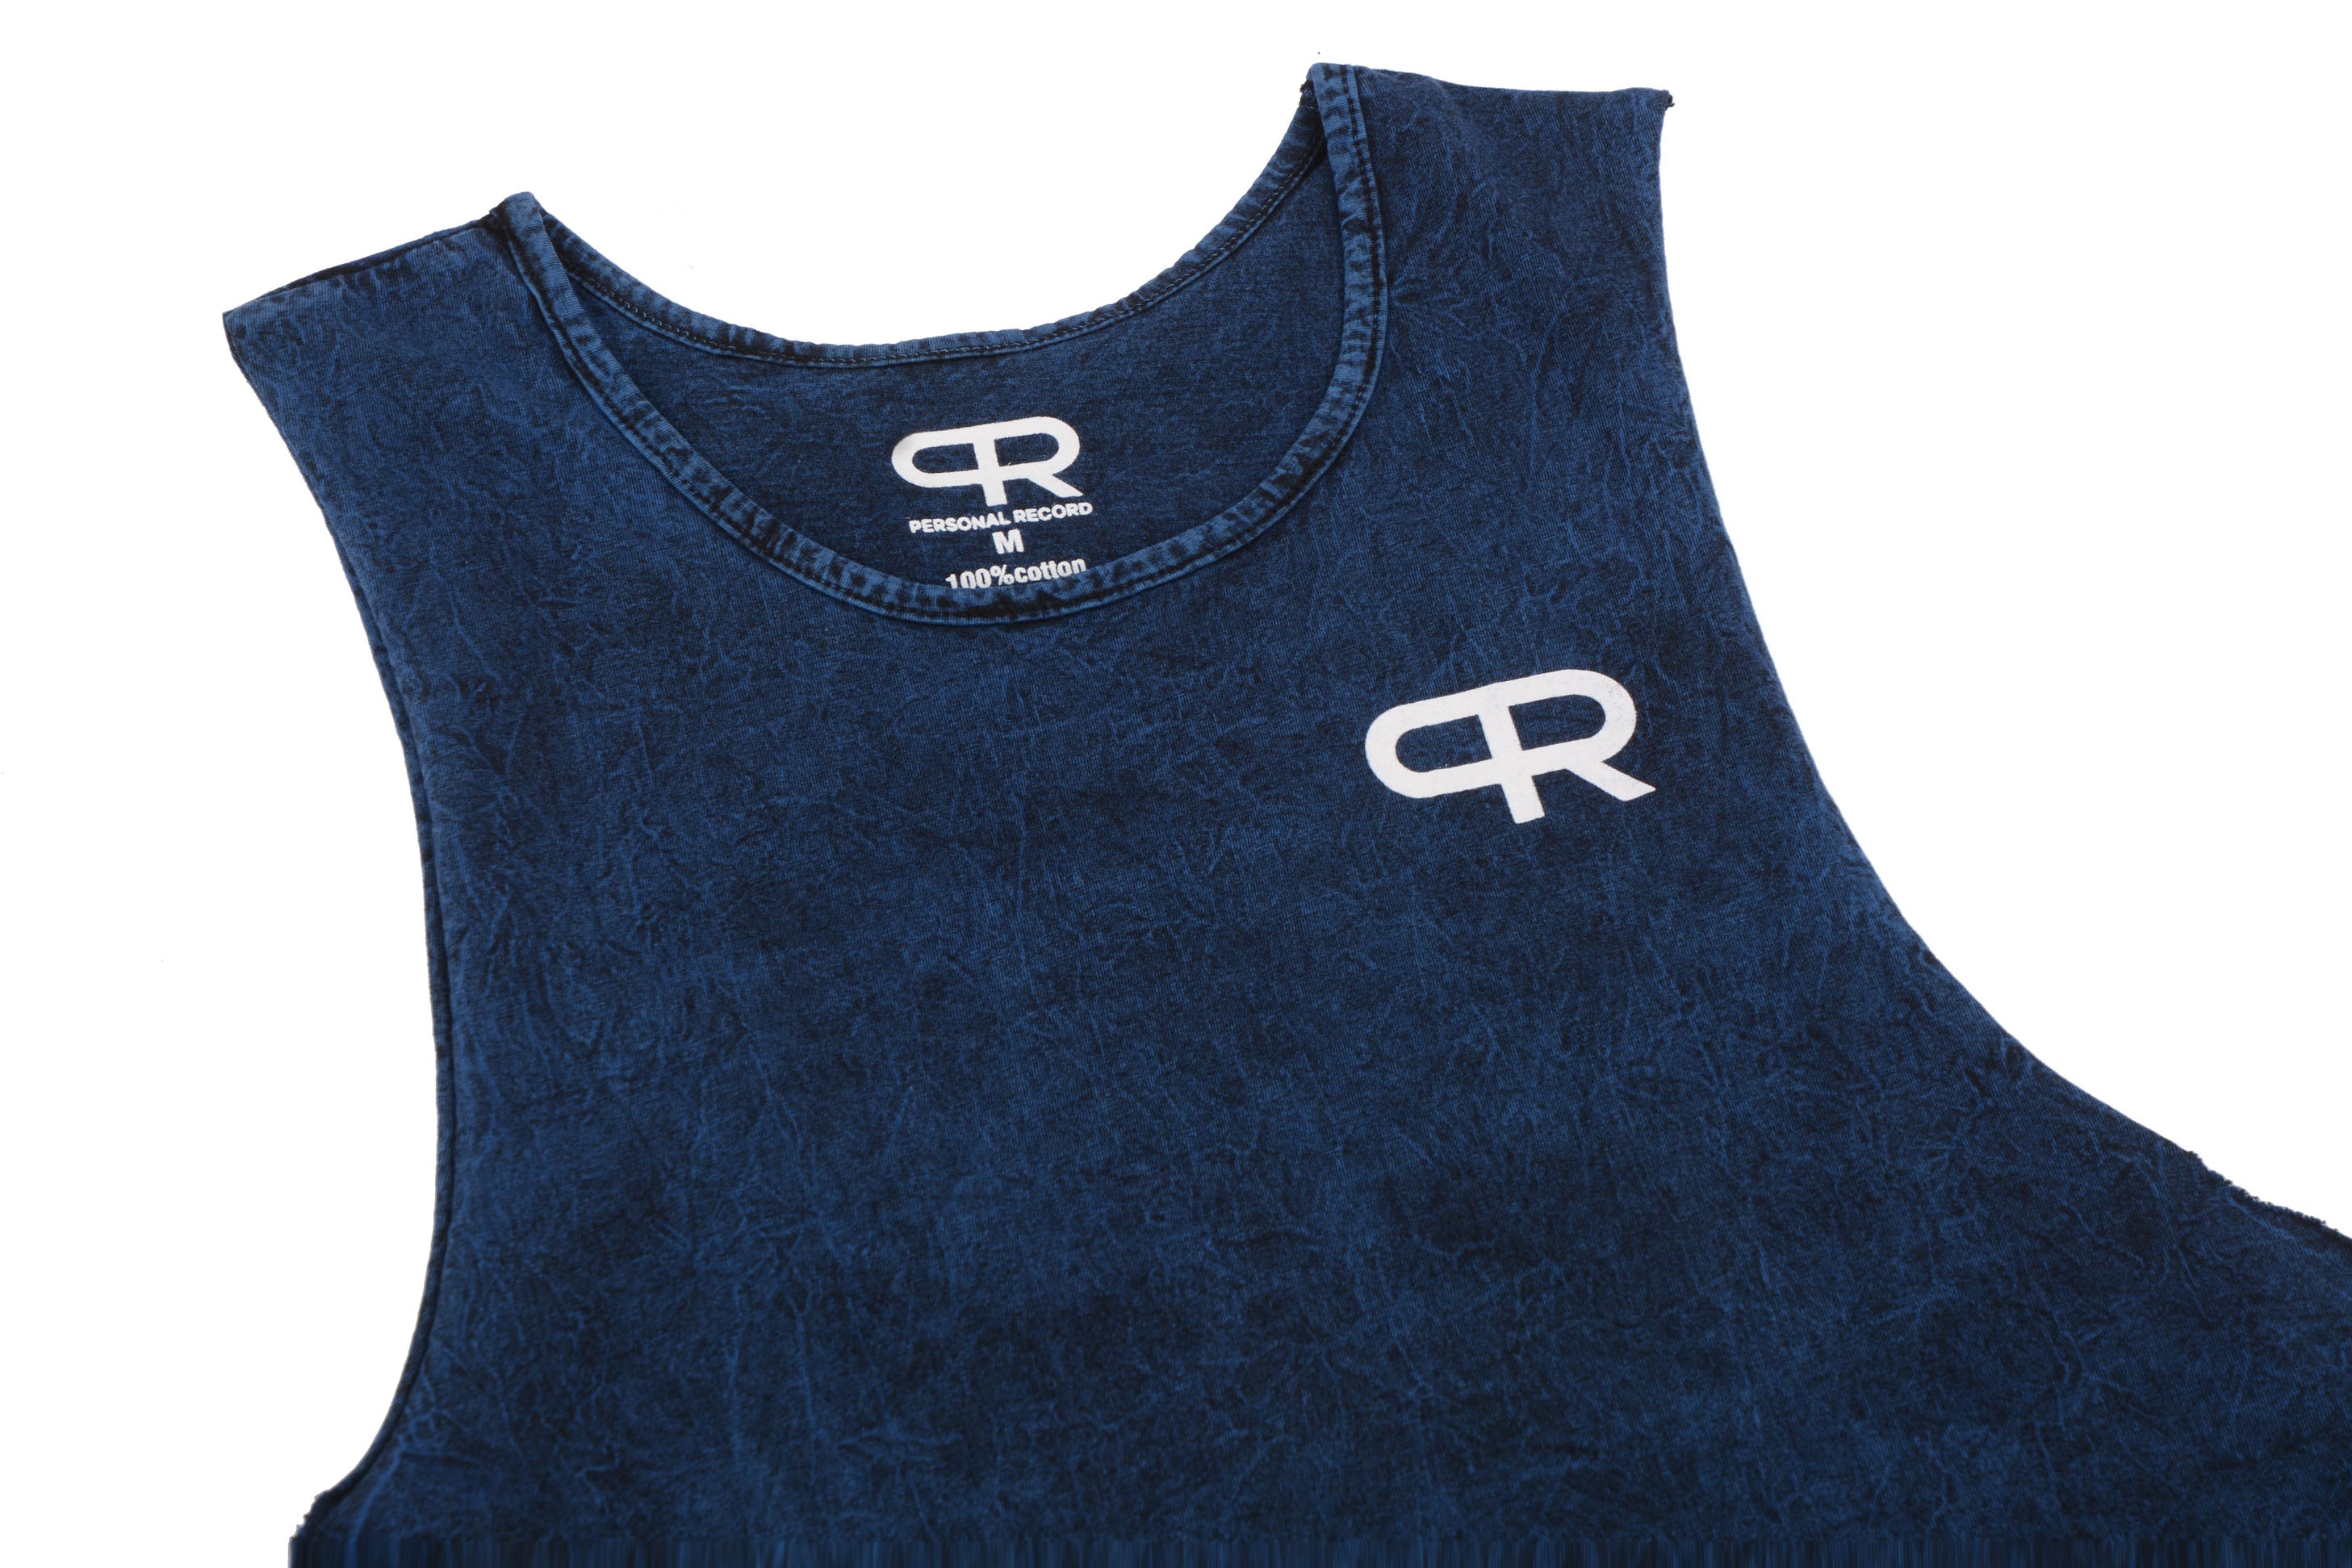 Personal Record Muscle Tank - PR309 - Mineral Wash Blue